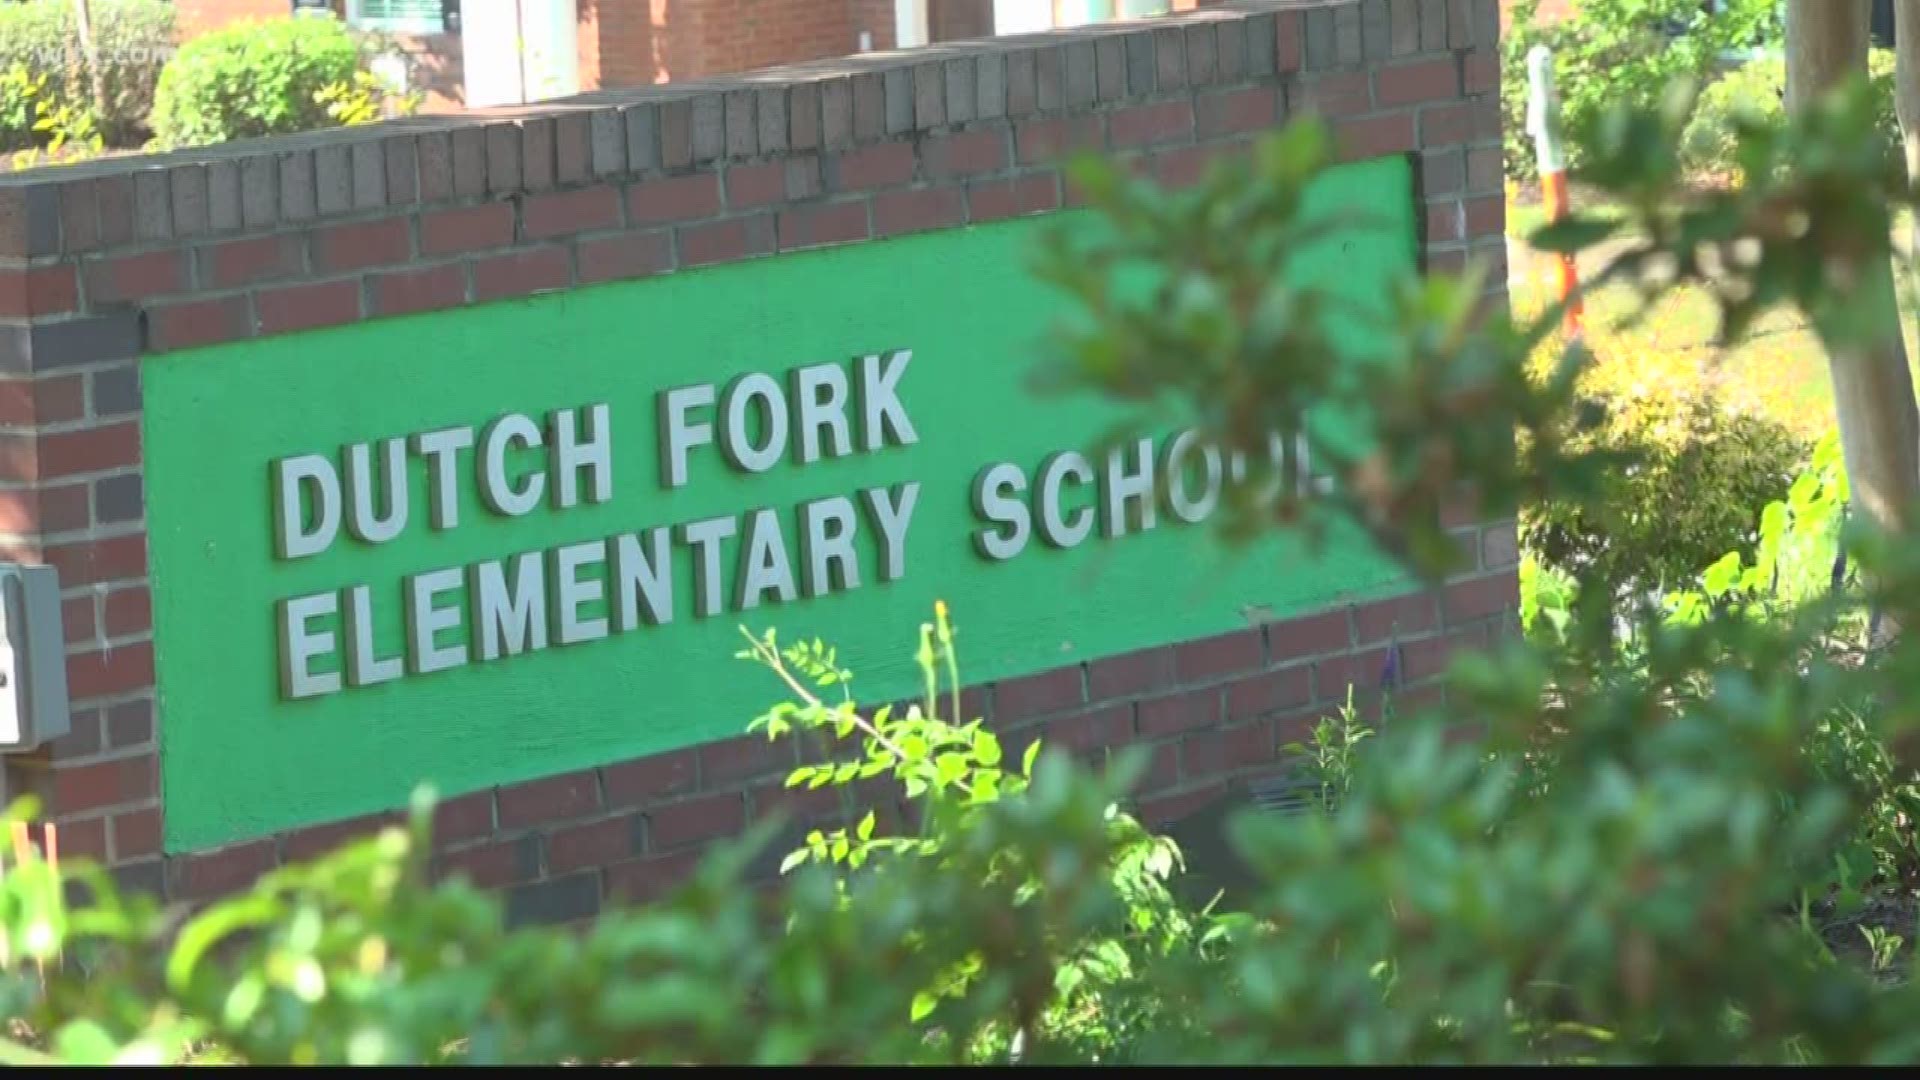 A Green Ribbon School is one that shows "21st century excellence." Dutch Fork Elementary is the first South Carolina school to be given this prestigious honor.